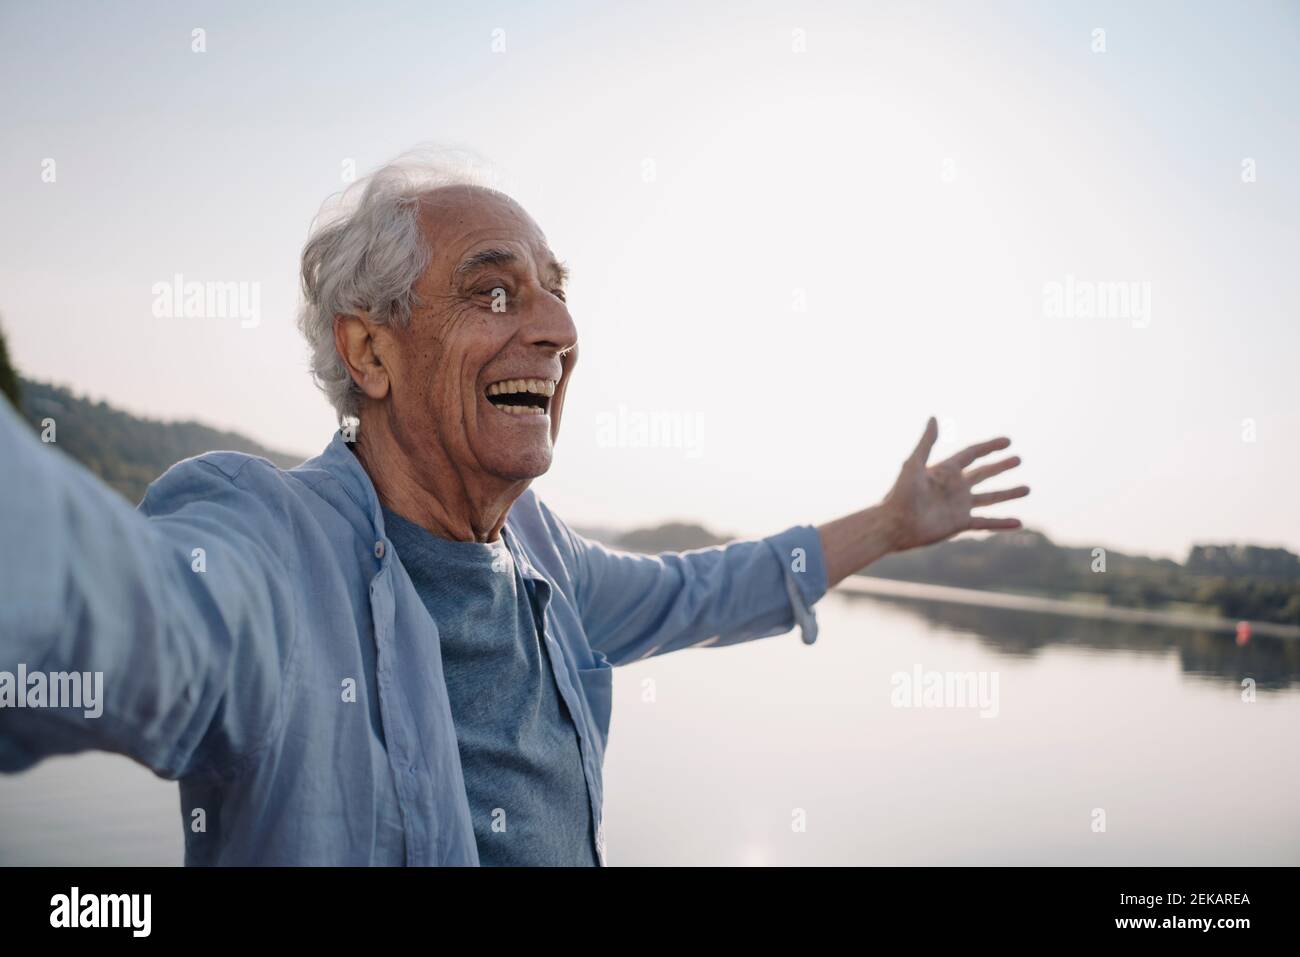 Carefree senior man standing with arms outstretched against sky Stock Photo